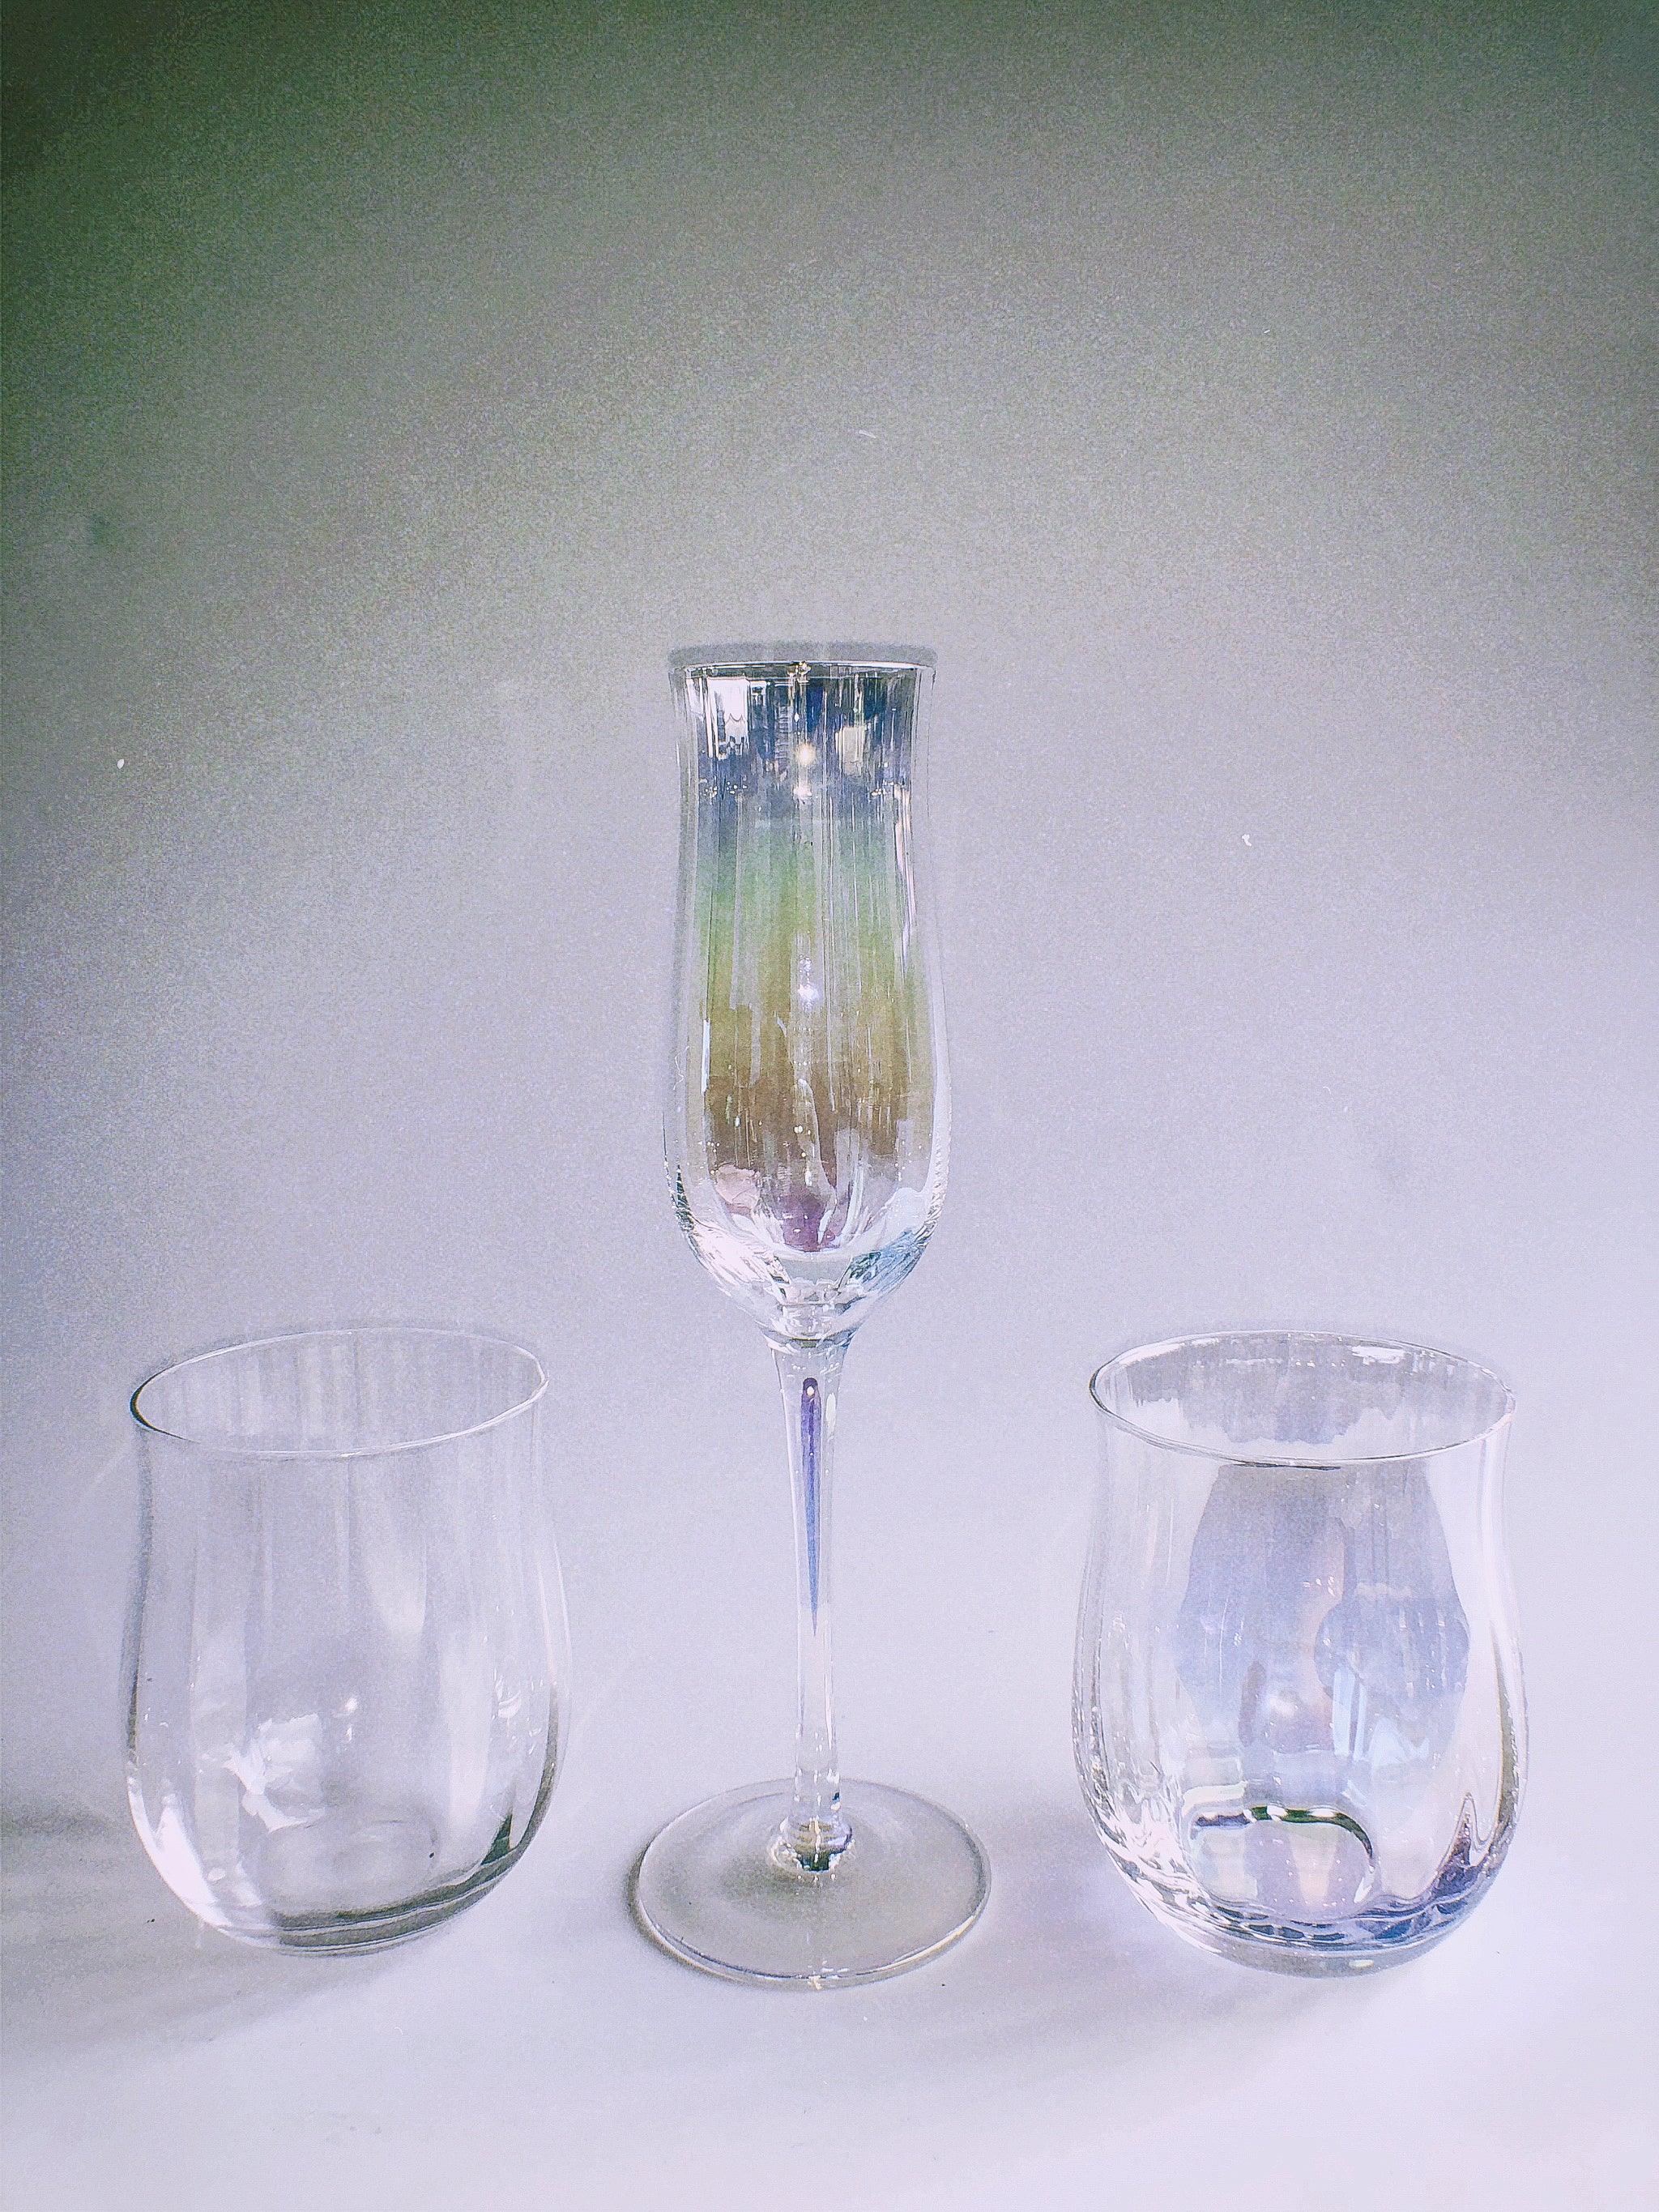 Iridescent Ripple Champagne Flute by PROSE Tabletop